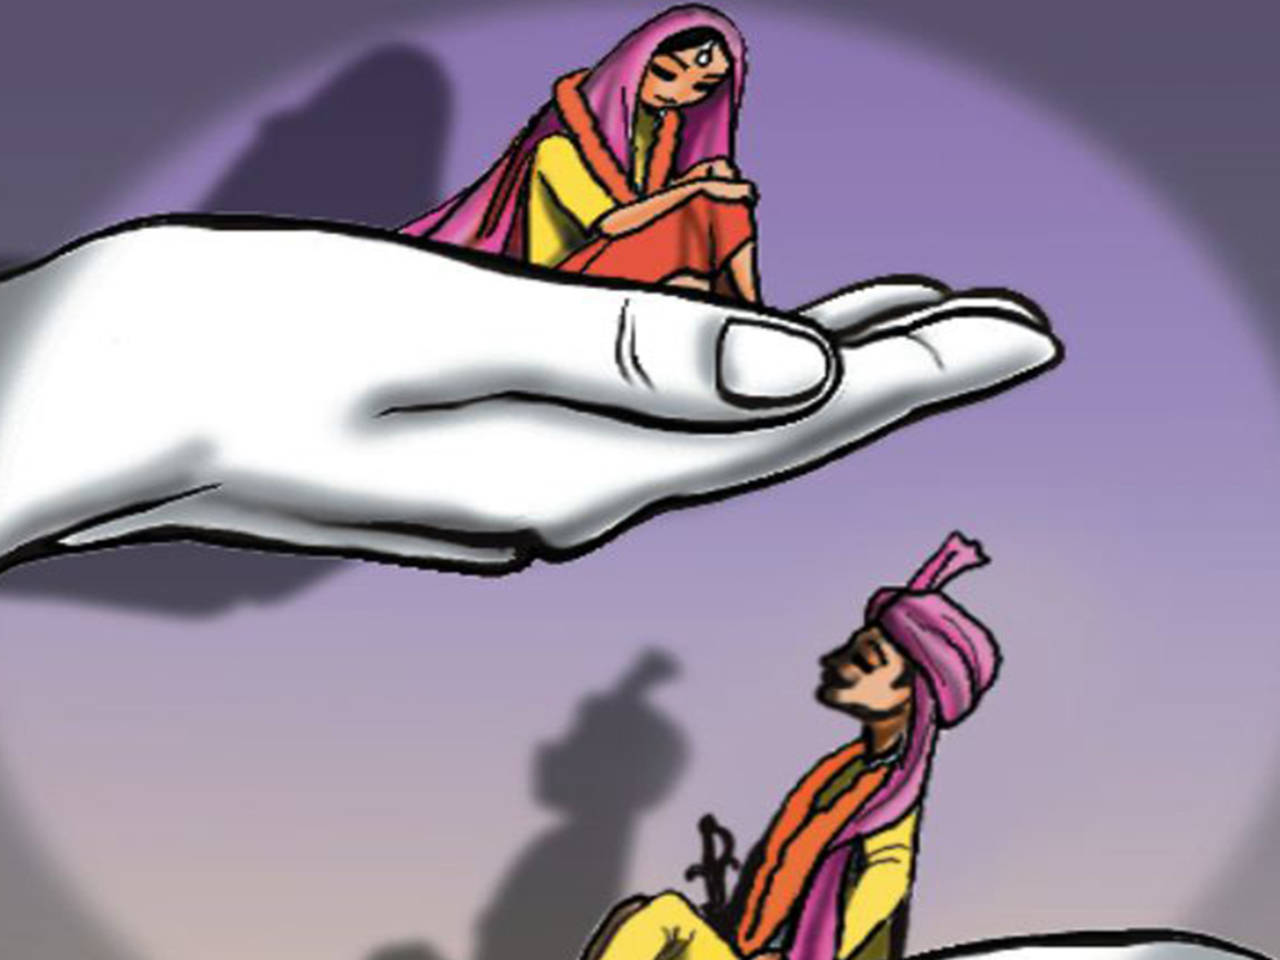 Prevent my marriage: Girl to police | Jaipur News - Times of India